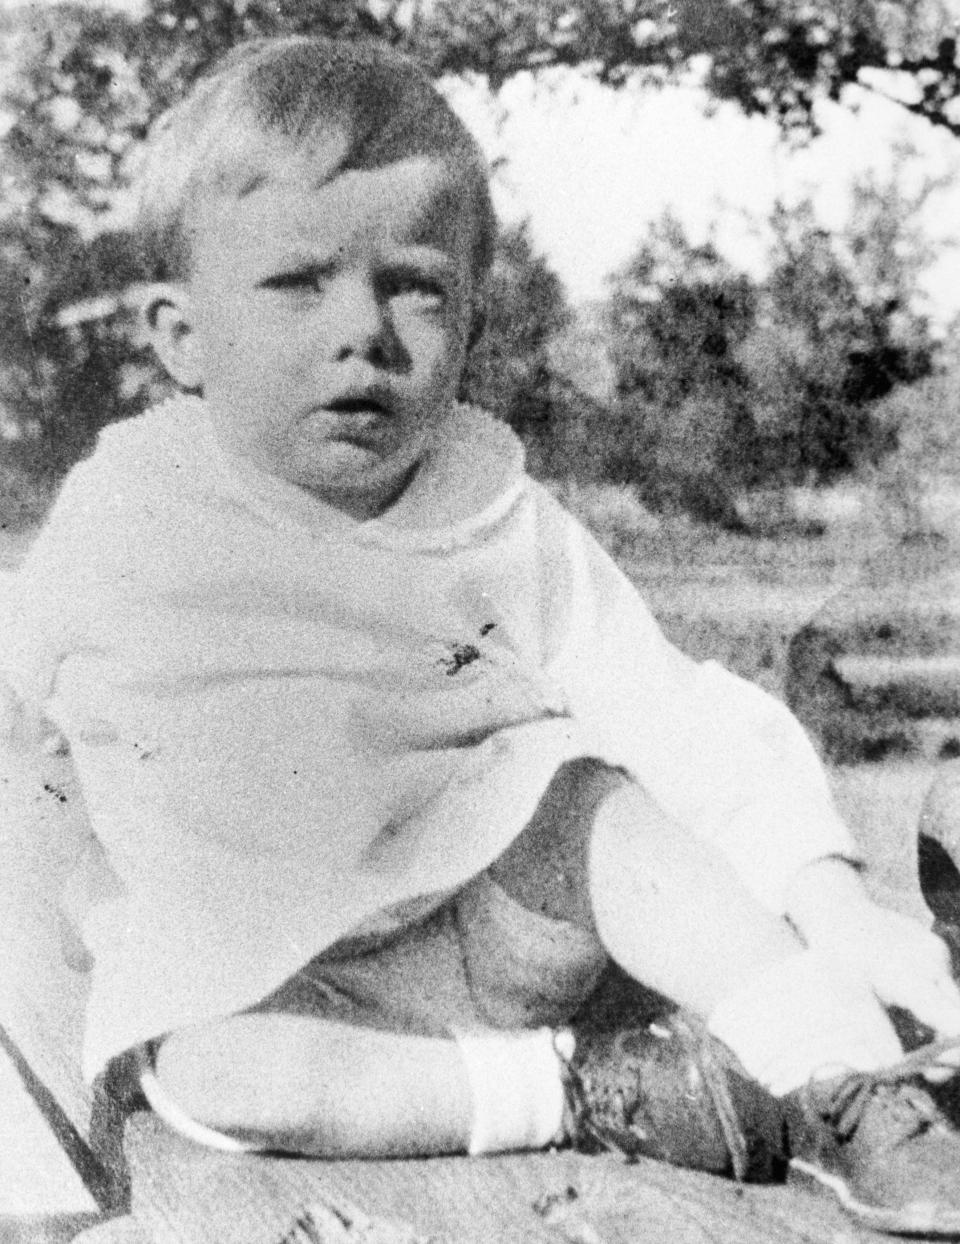 Jimmy Carter at one year old